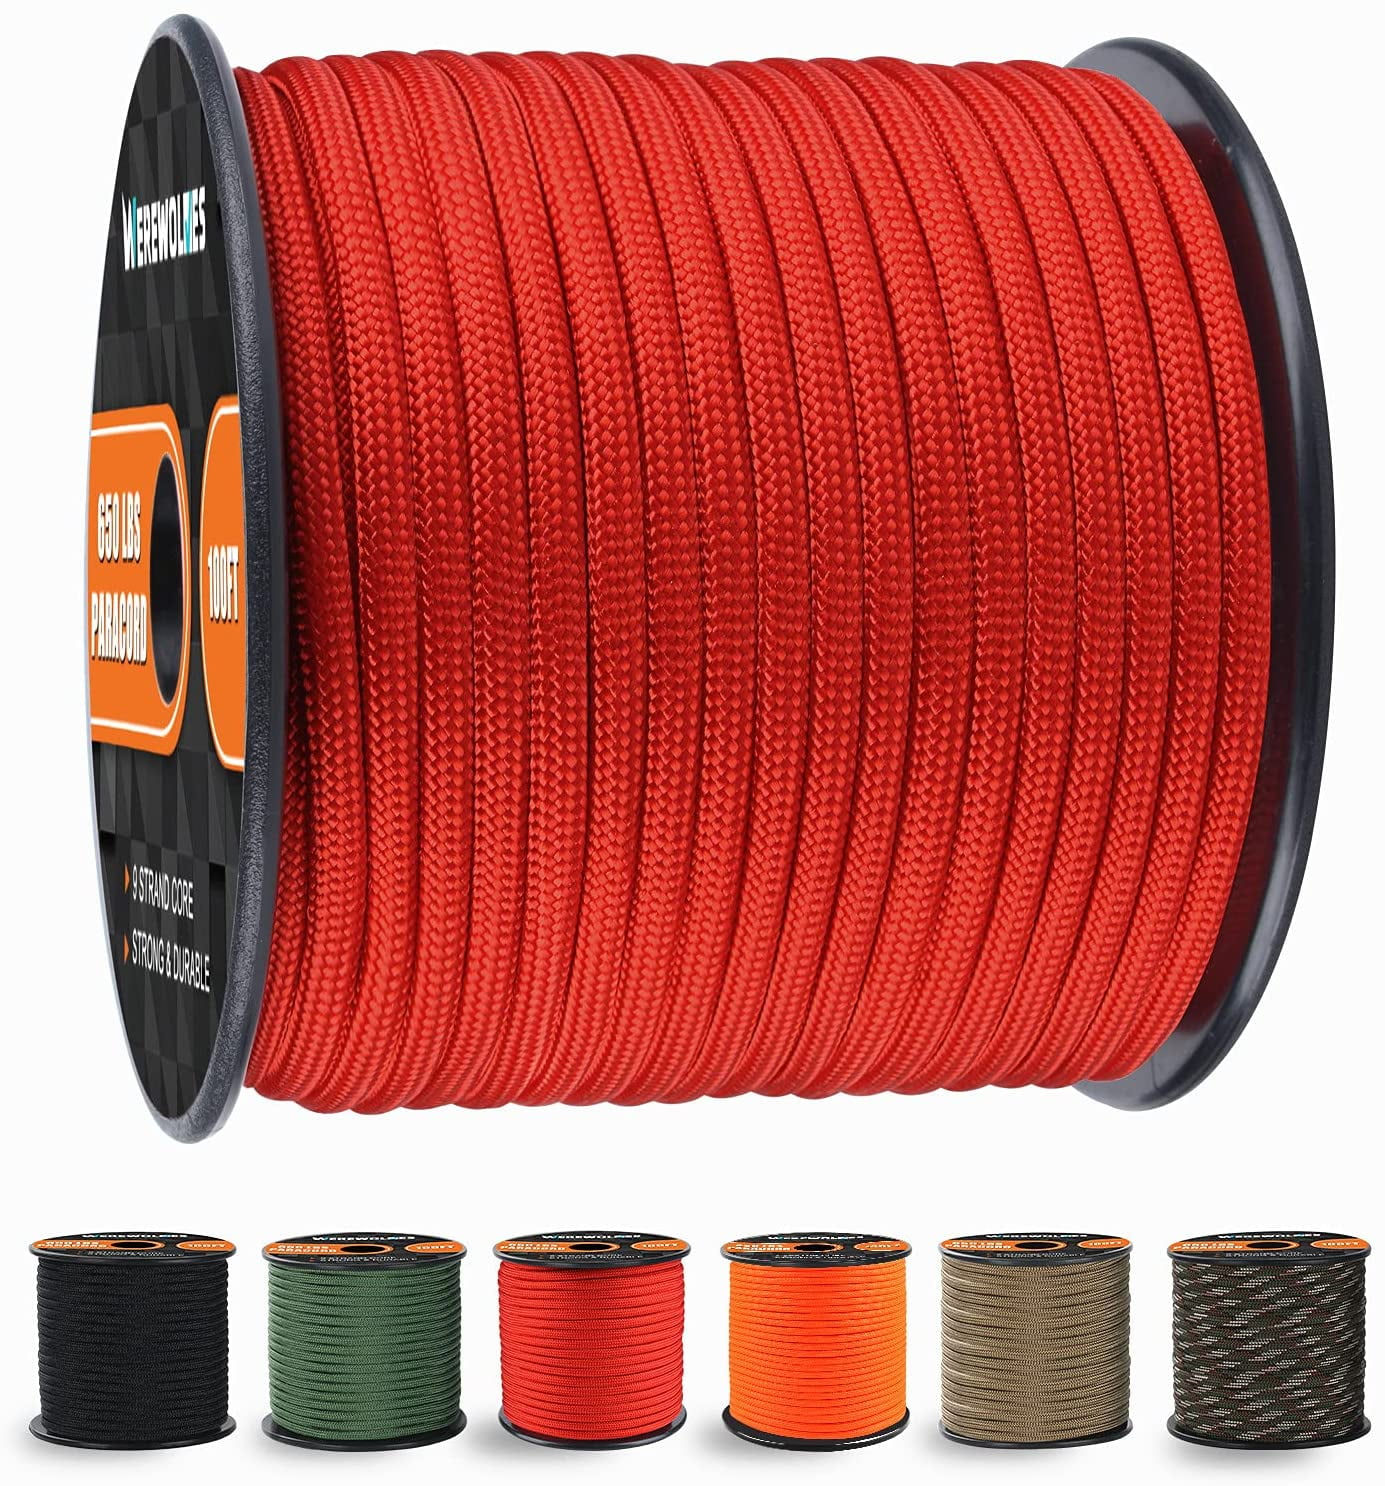 Climbing Rod 100m Paracord 1 Strand Core Paracord 2mm Dia 1 Strand Core  Multi Function Paracord For Camping Climbing Tying Rope15M